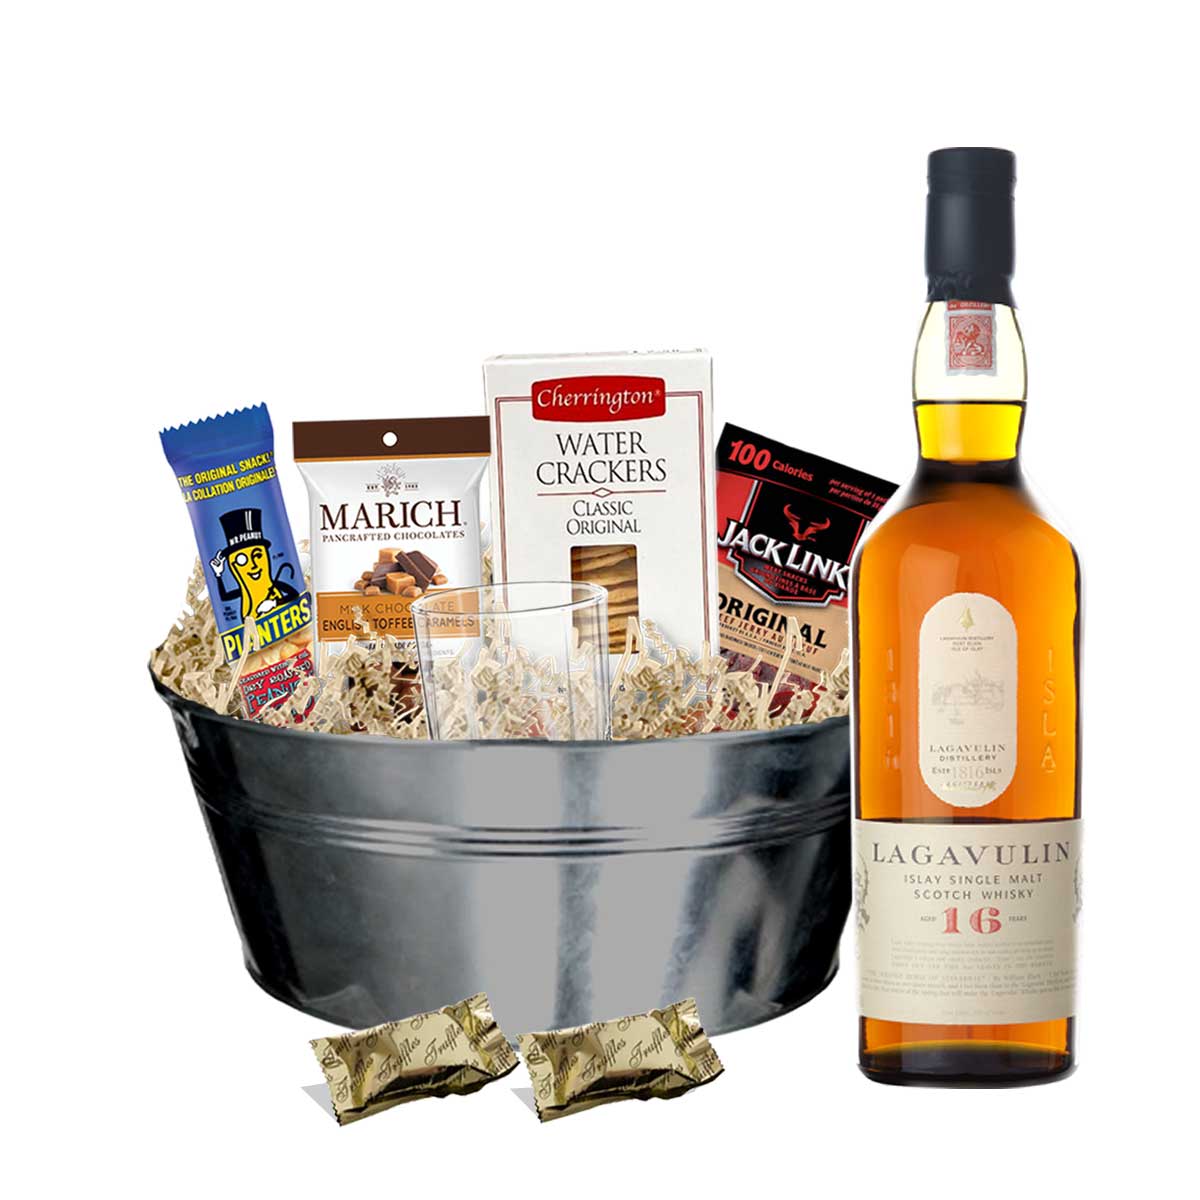 TAG Liquor Stores BC - Lagavulin 16 Year Old Scotch Whisky 750ml Gift Basket